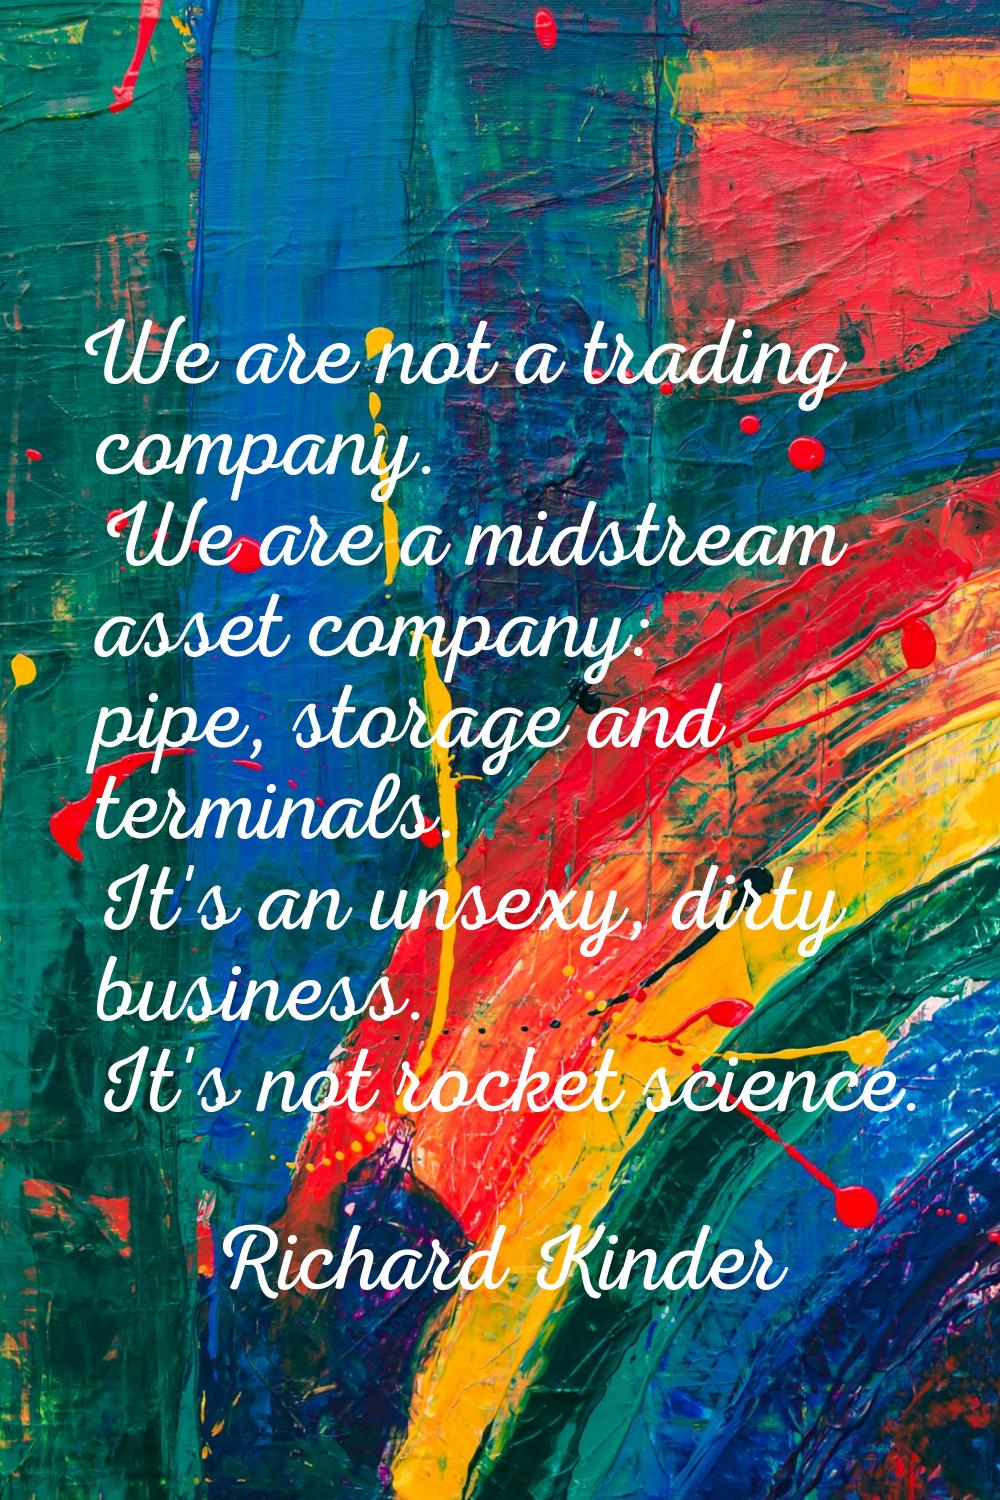 We are not a trading company. We are a midstream asset company: pipe, storage and terminals. It's a